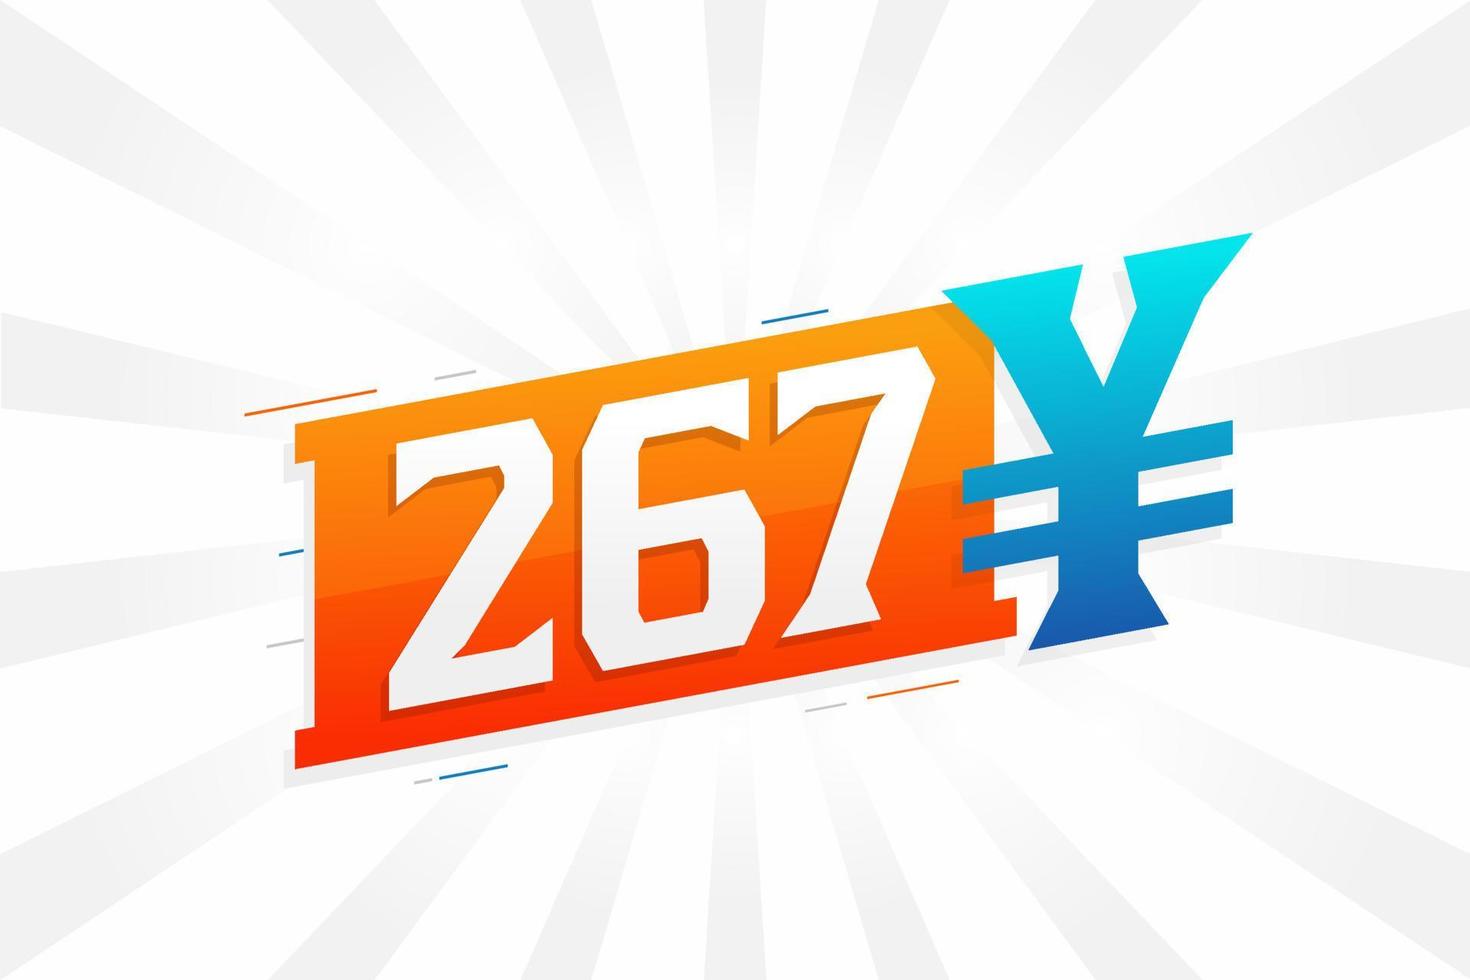 267 Yuan Chinese currency vector text symbol. 267 Yen Japanese currency Money stock vector